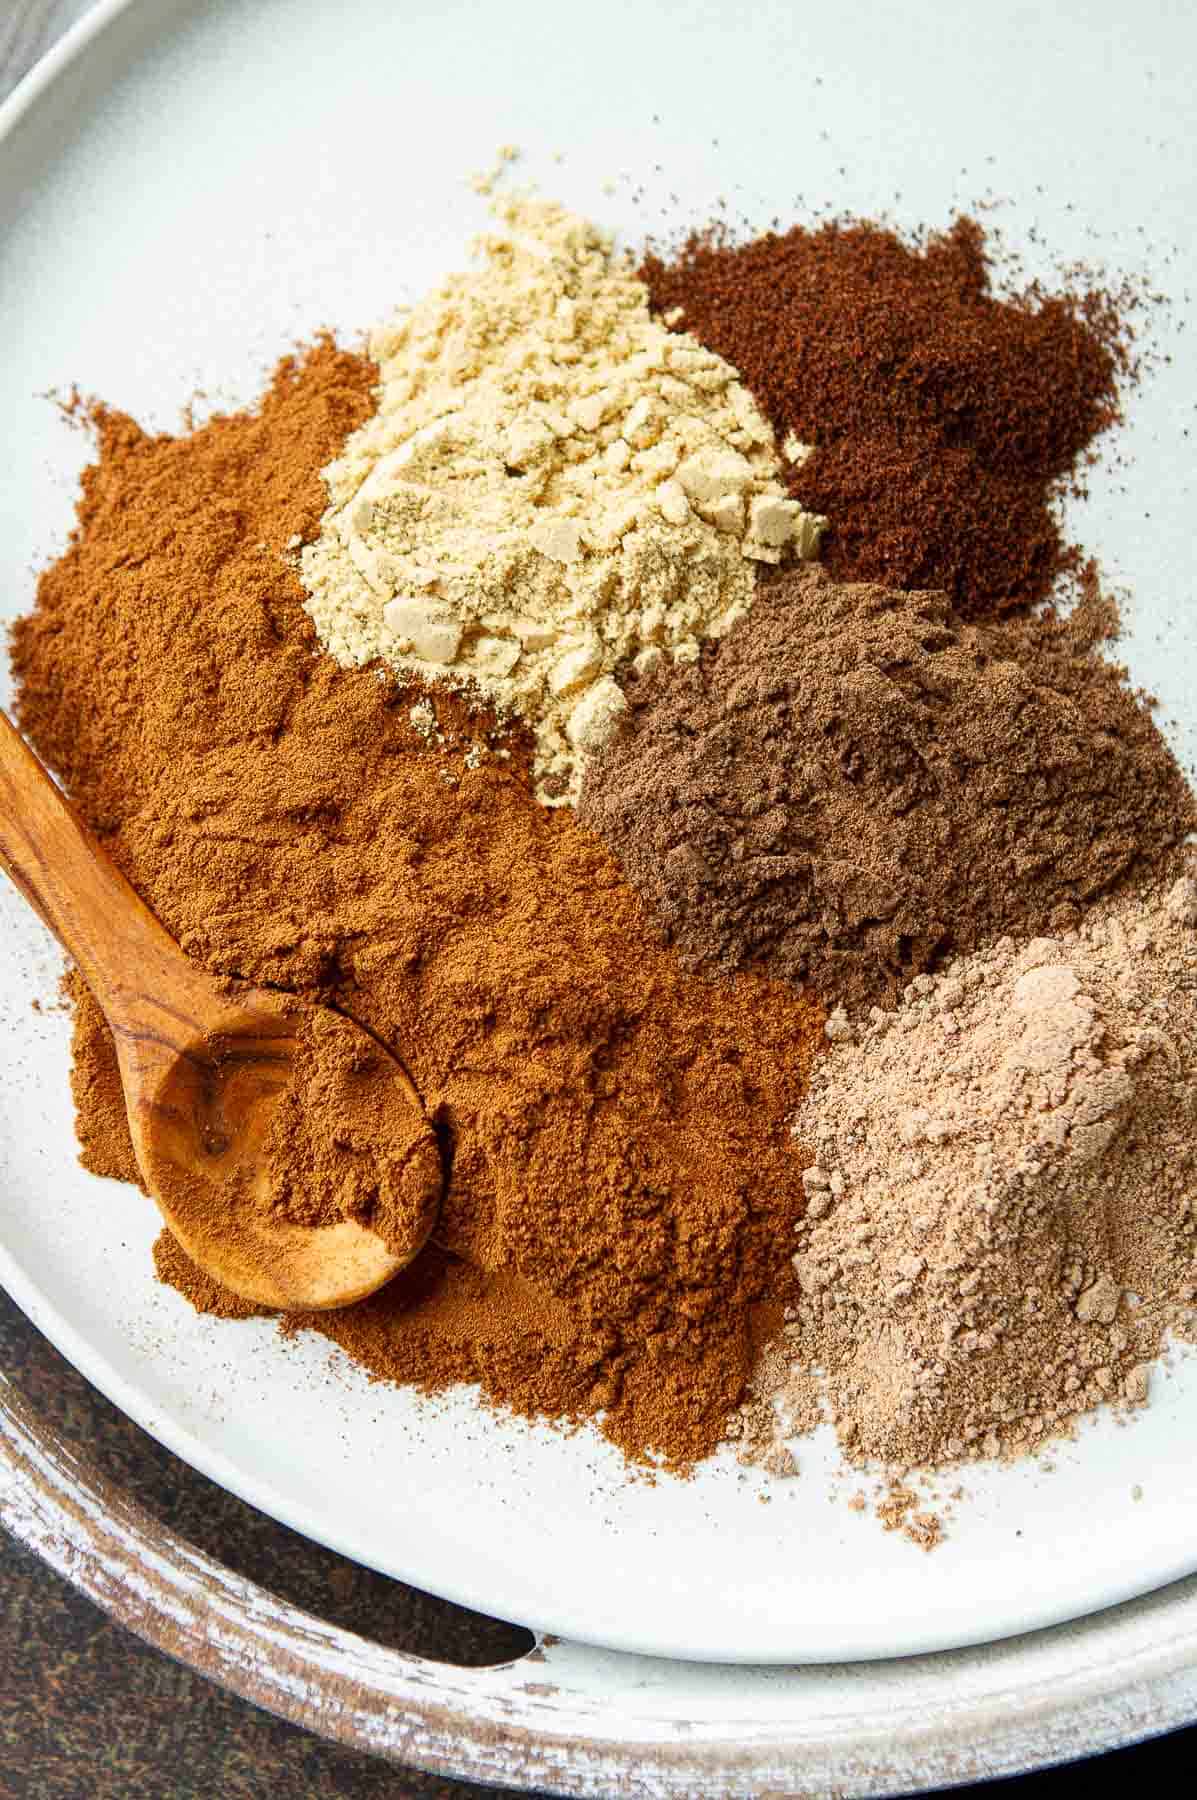 Piles of five spices on a white plate.